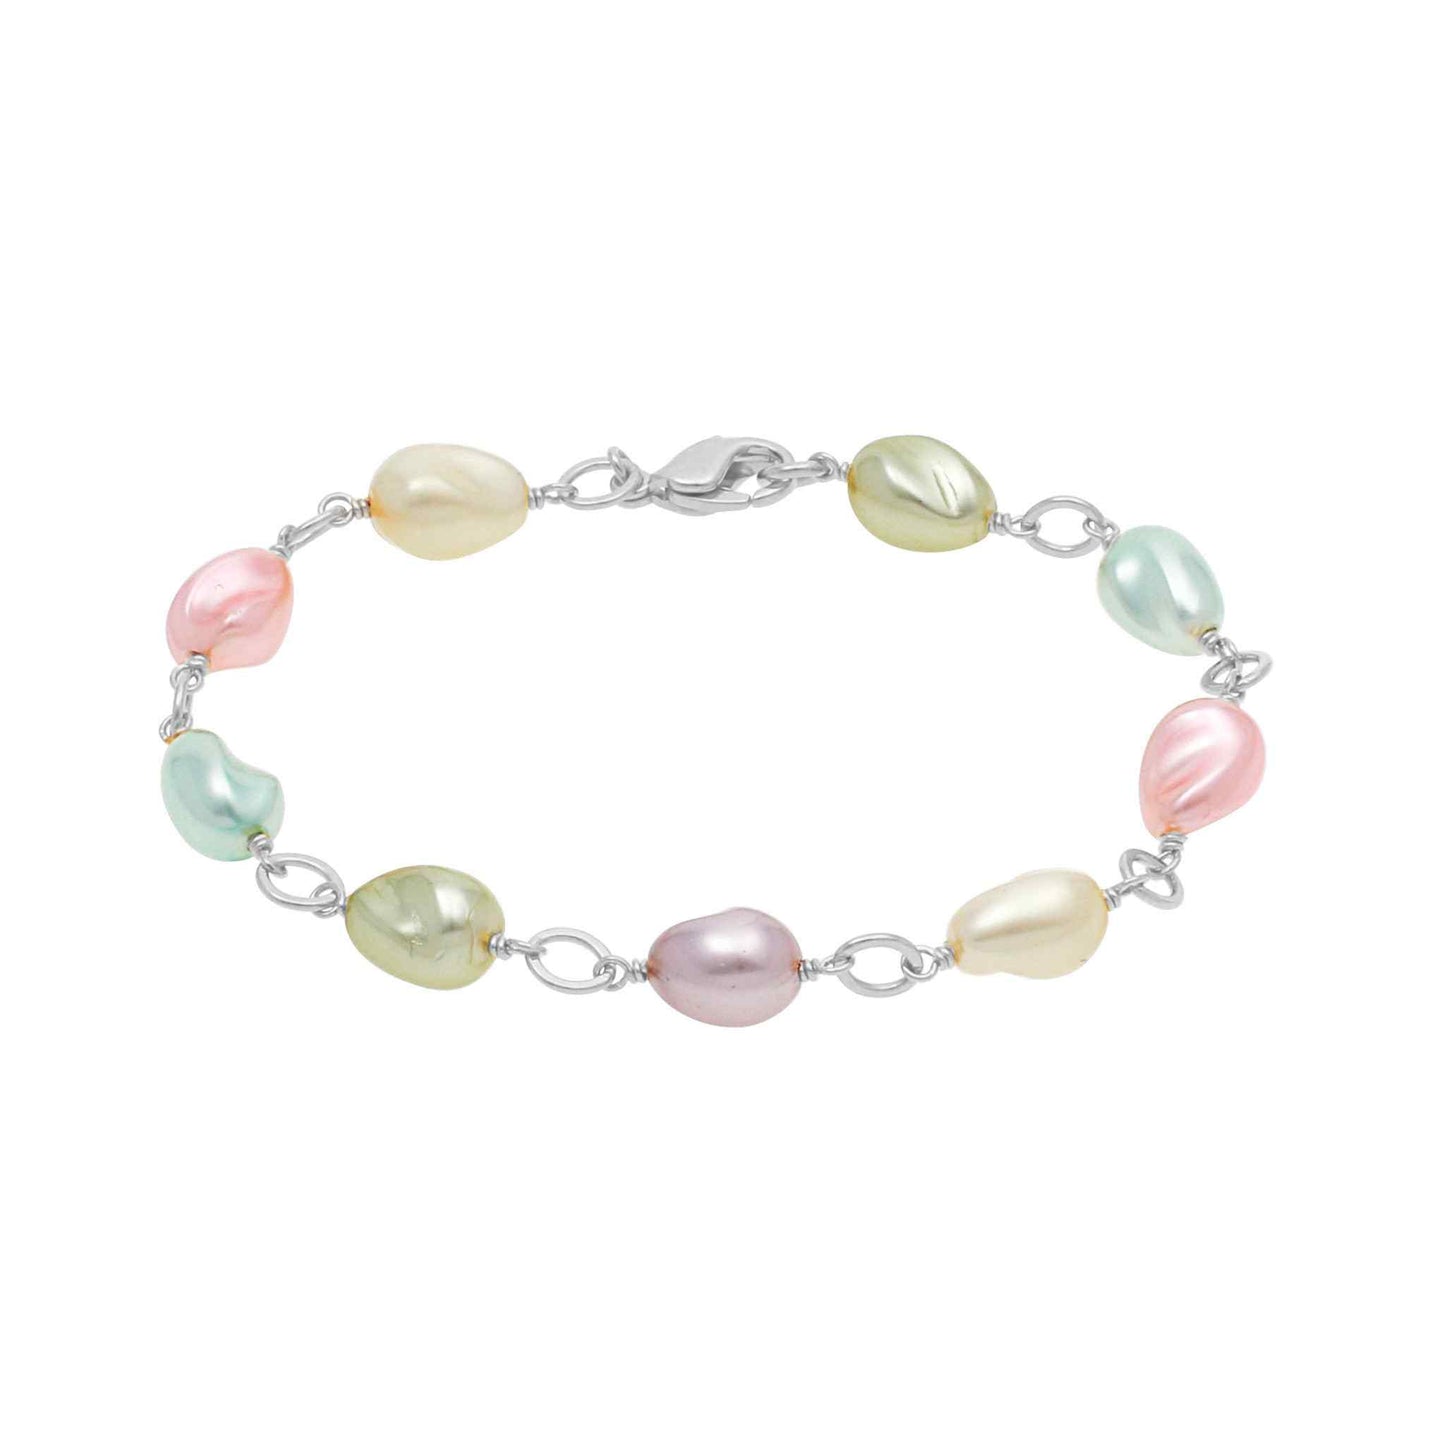 A multicolored tin cup bracelet displayed on a neutral white background.